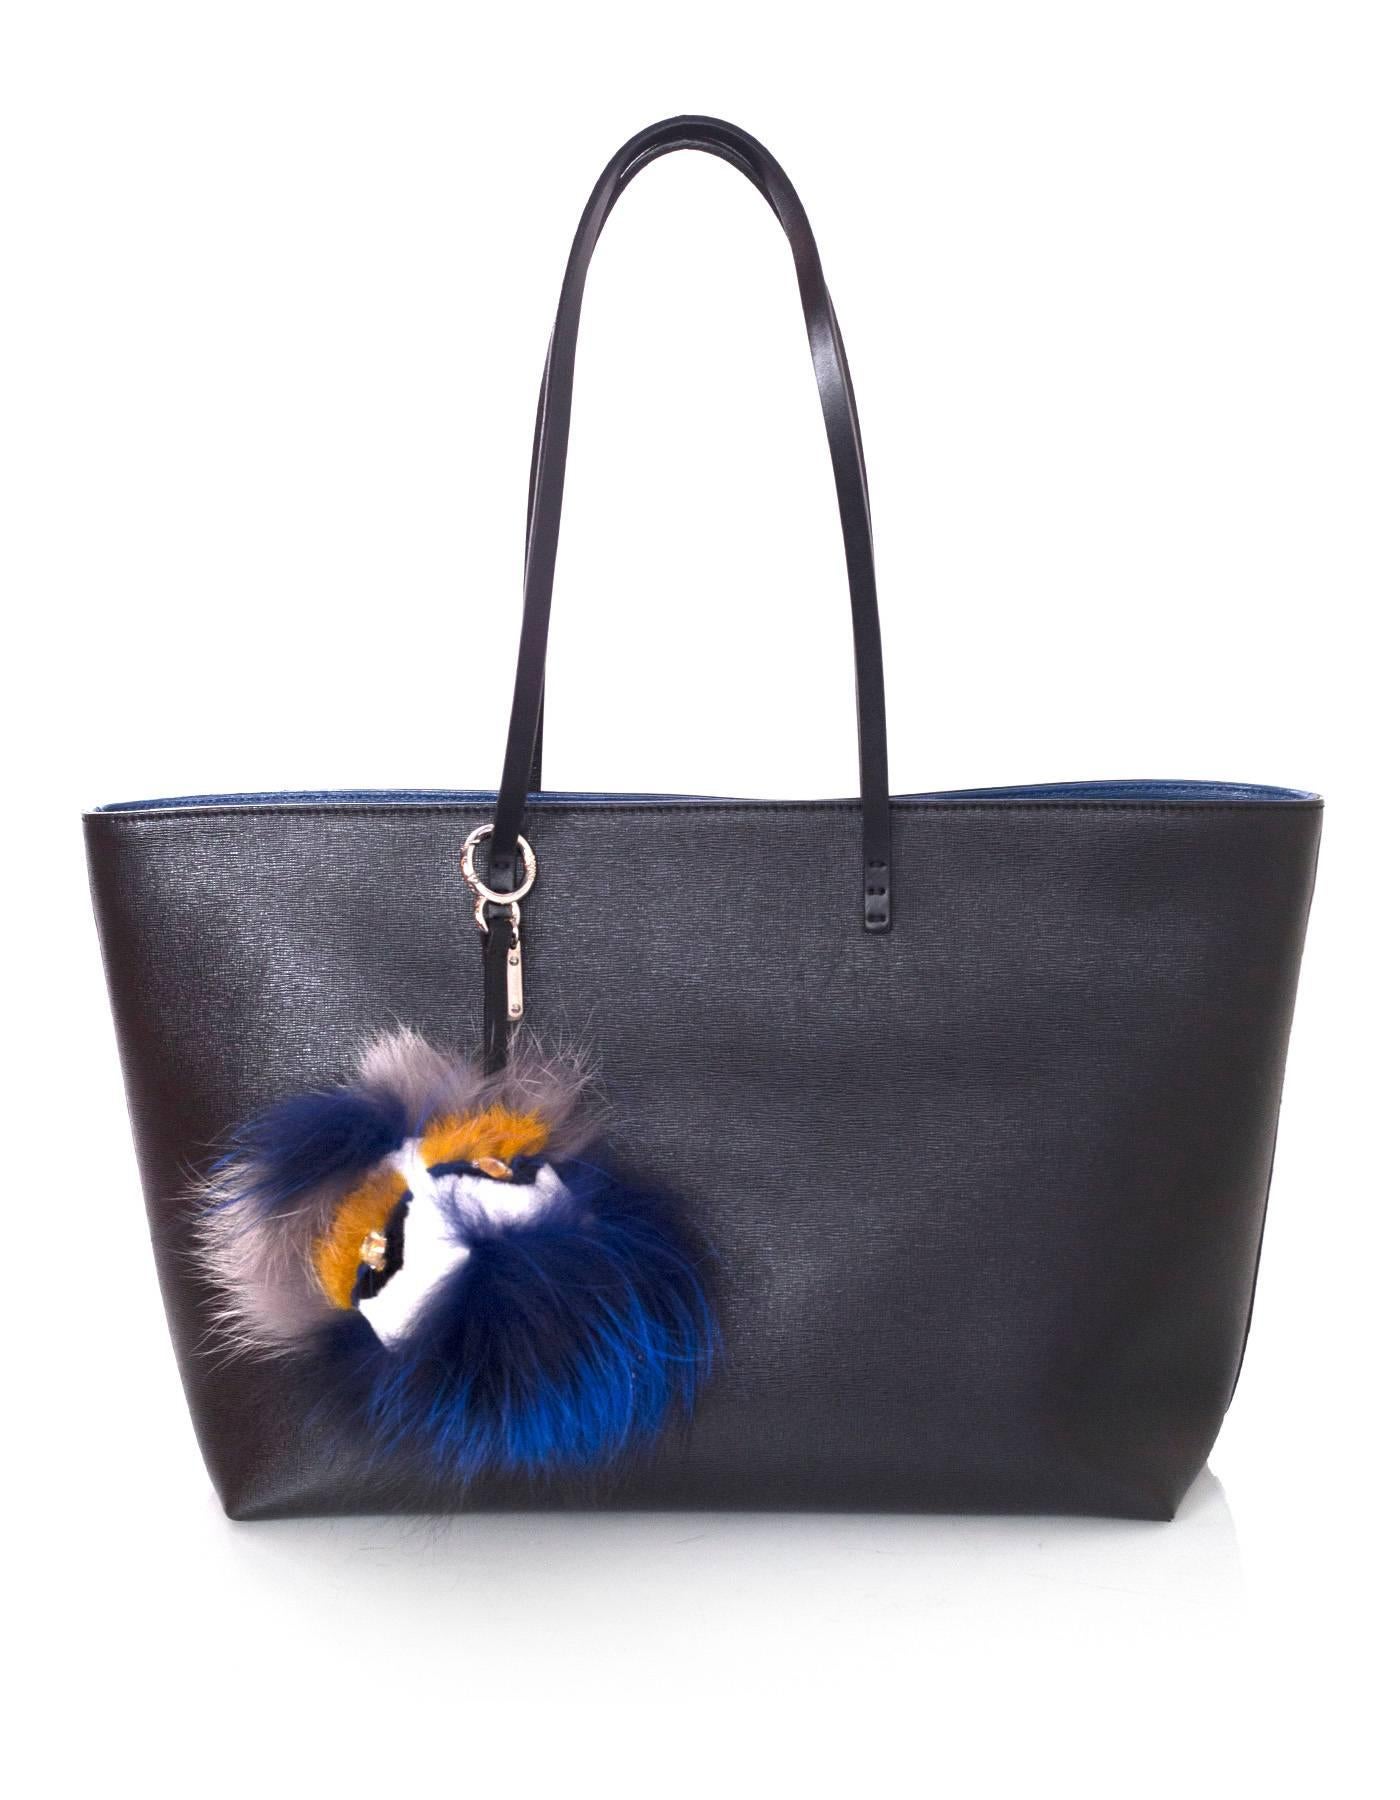 Fendi Blue and White Mink & Fox Fur Bag Bug Charm
Features Swarovski crystal eyes

Made In: Italy
Color: Blue, white
Hardware: Silvertone
Materials: Fox, mink
Closure/Opening: Jump ring push lever
Overall Condition: Excellent
Includes: Fendi box